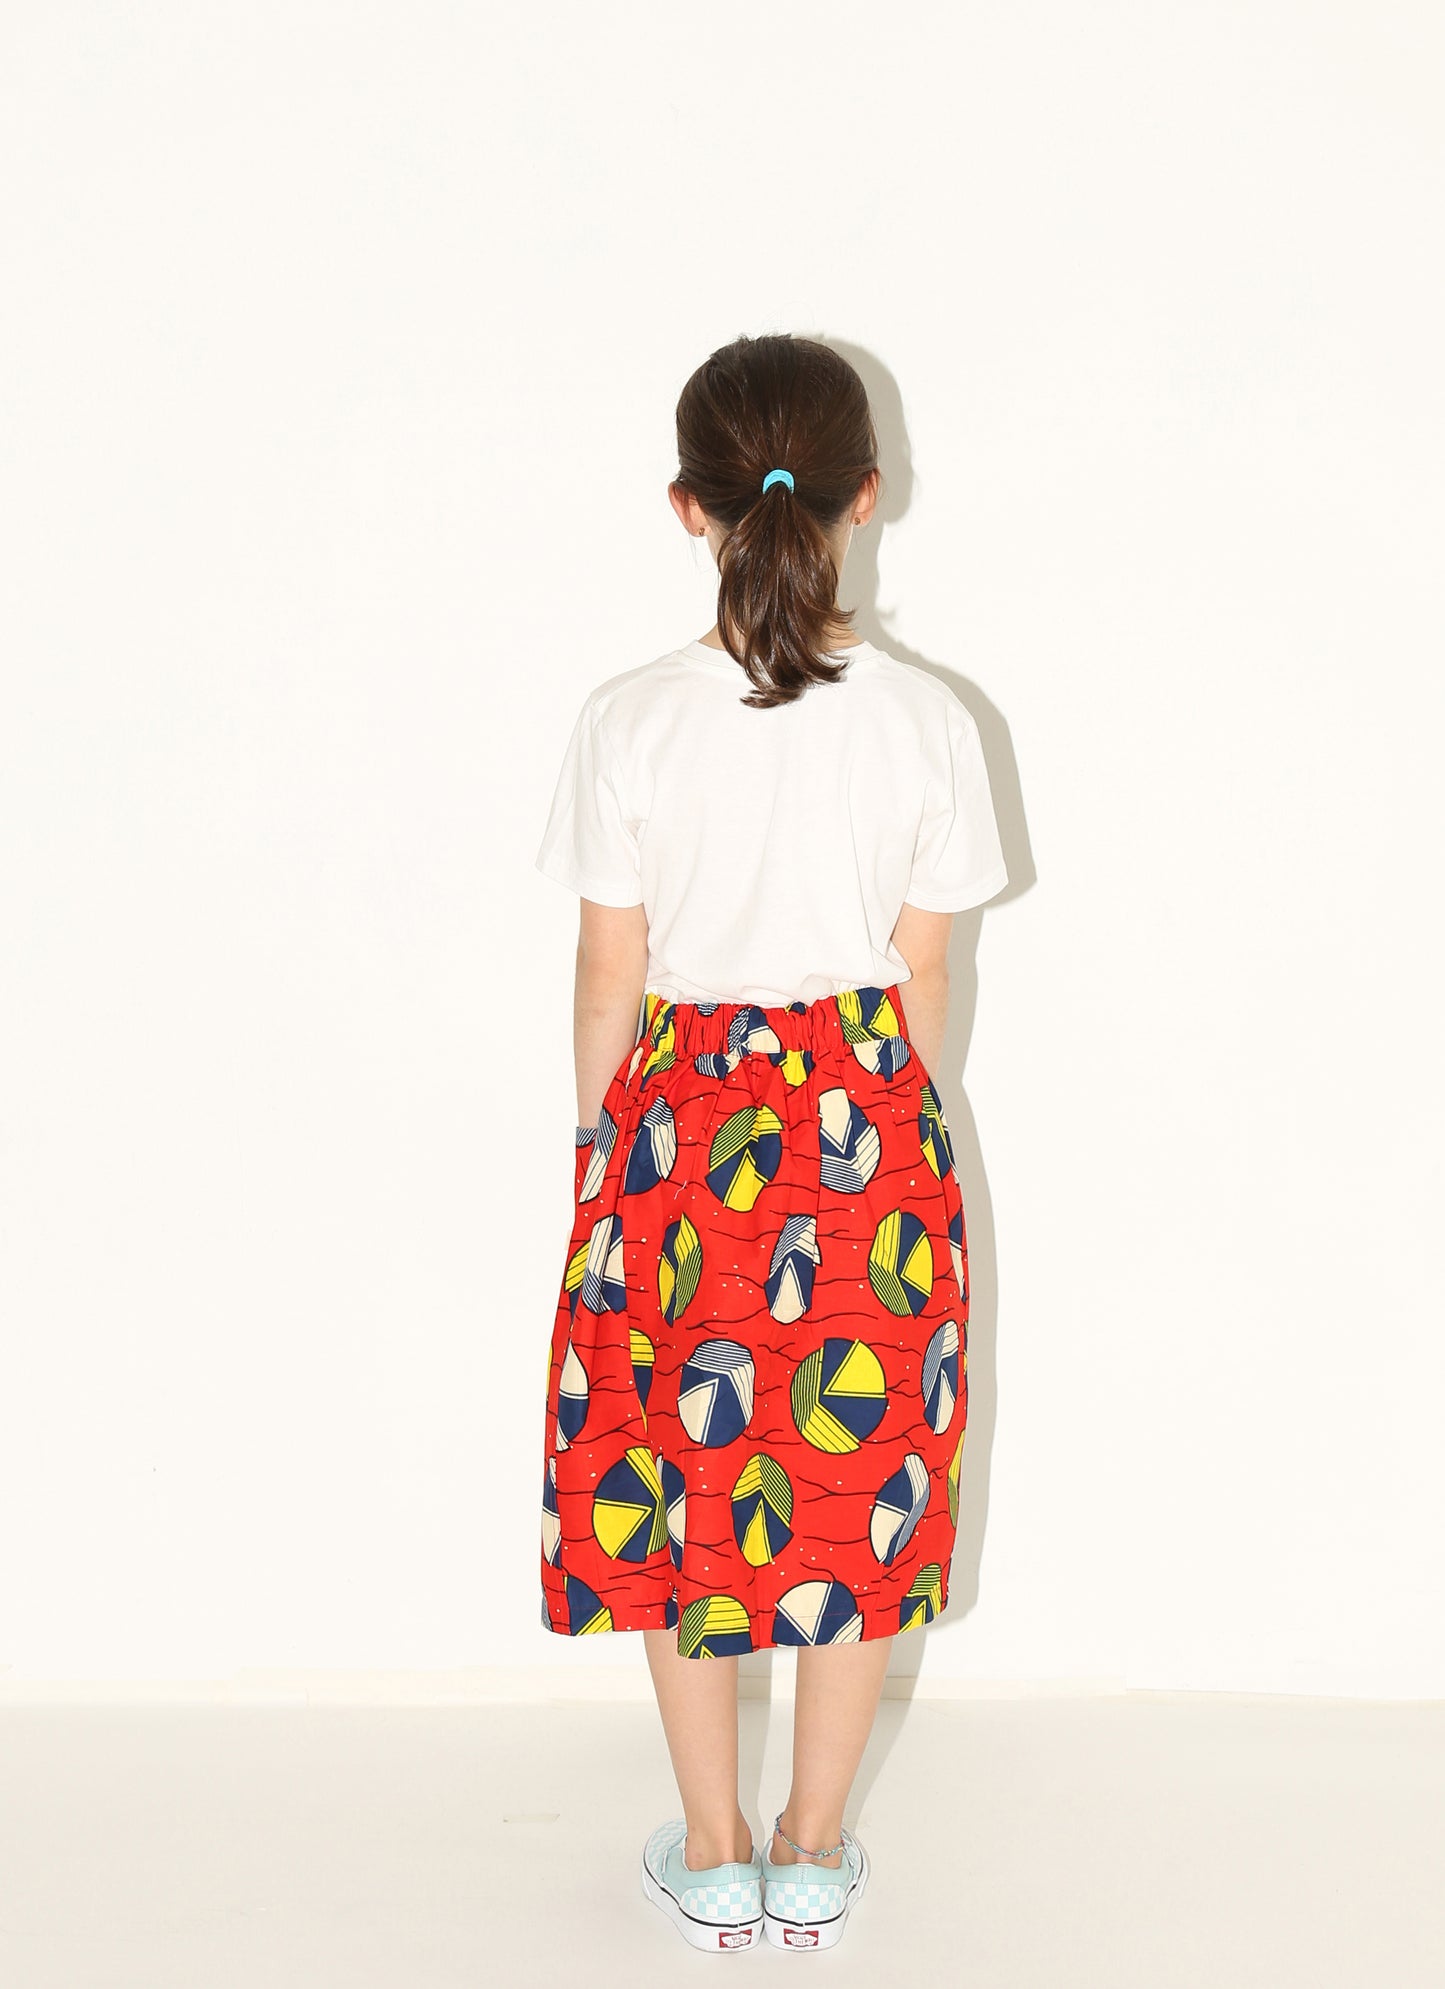 PAIGE Skirts / Red Discs